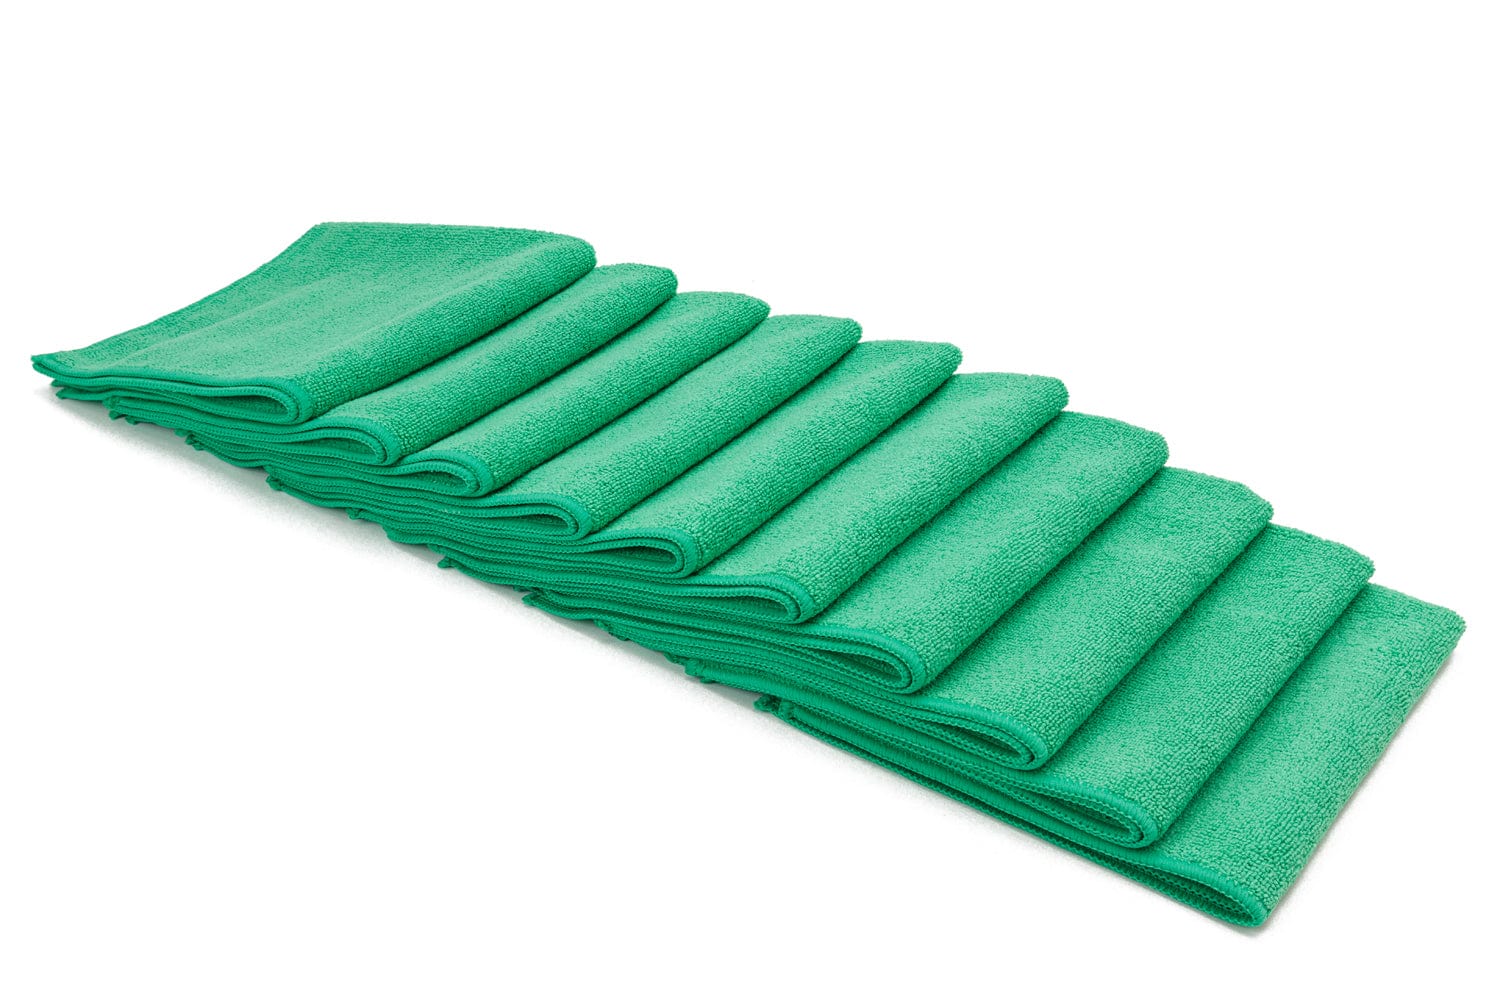 Autofiber Green / Stitched [Utility 300] All-Purpose Edgeless Microfiber Towel (16 in x 16 in., 300 gsm) 10pack